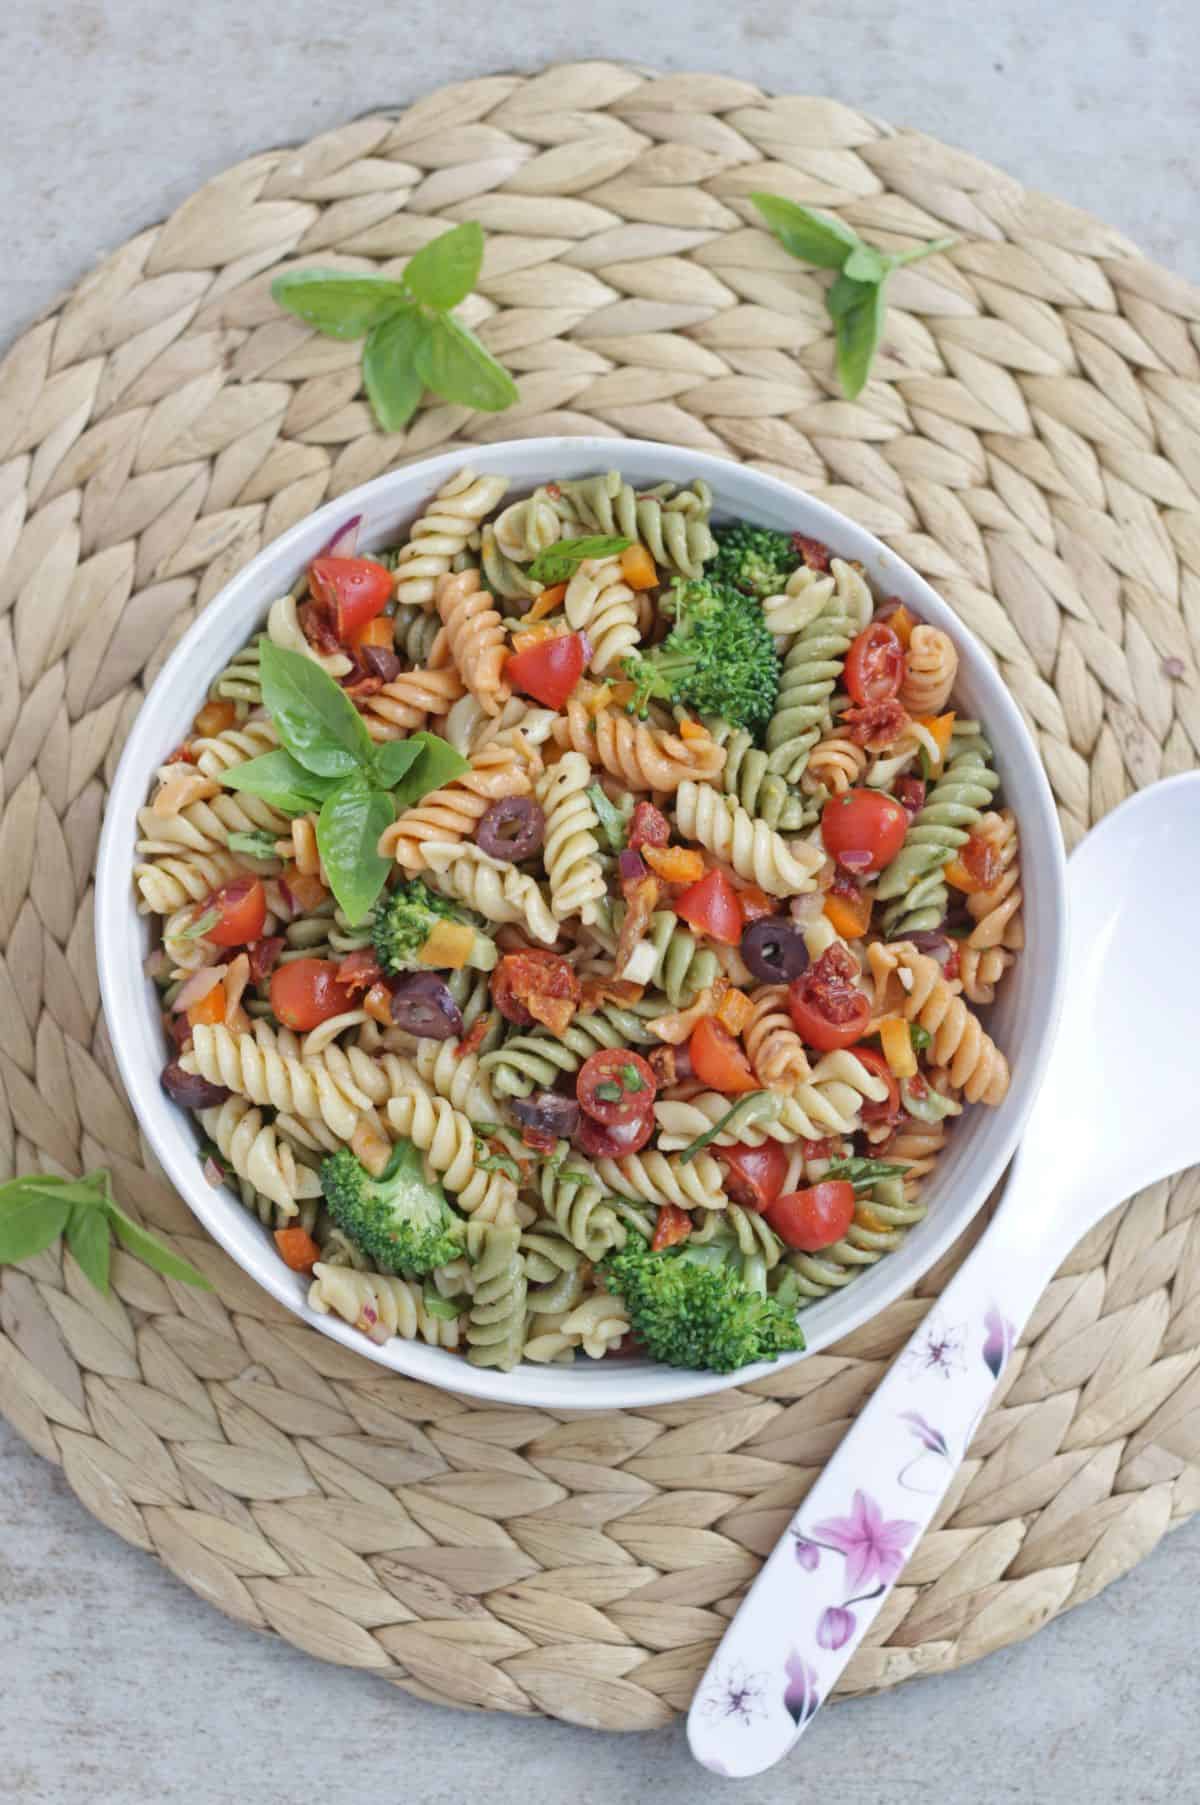 salad with pasta, broccoli, olives and basil in a mat with a serving spoon on side